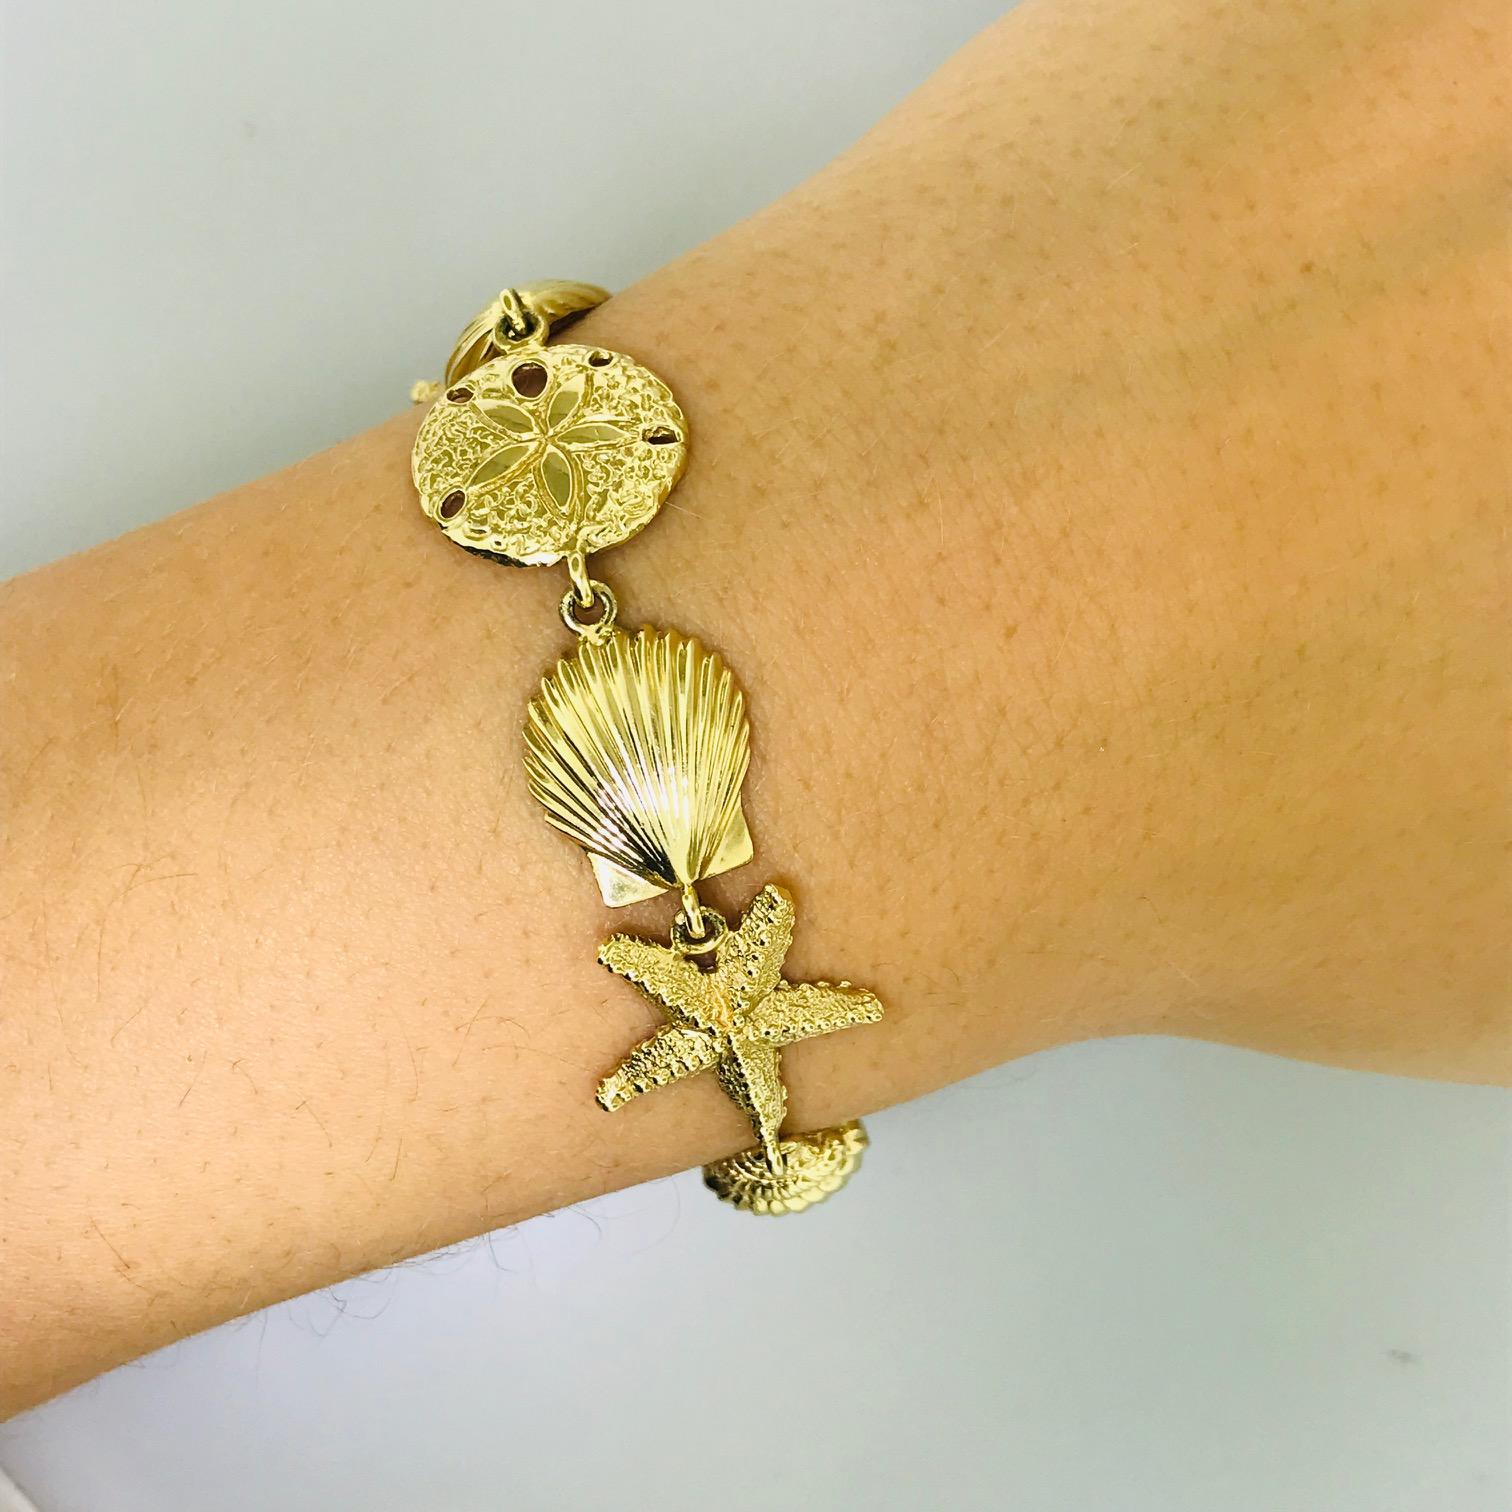 The beach has been a symbolic place for romance and love for eternity. The beach reflects life and consistence with beautiful waves traveling for miles and always returning back to sea. The beach is peace, hope and love and this gold bracelet